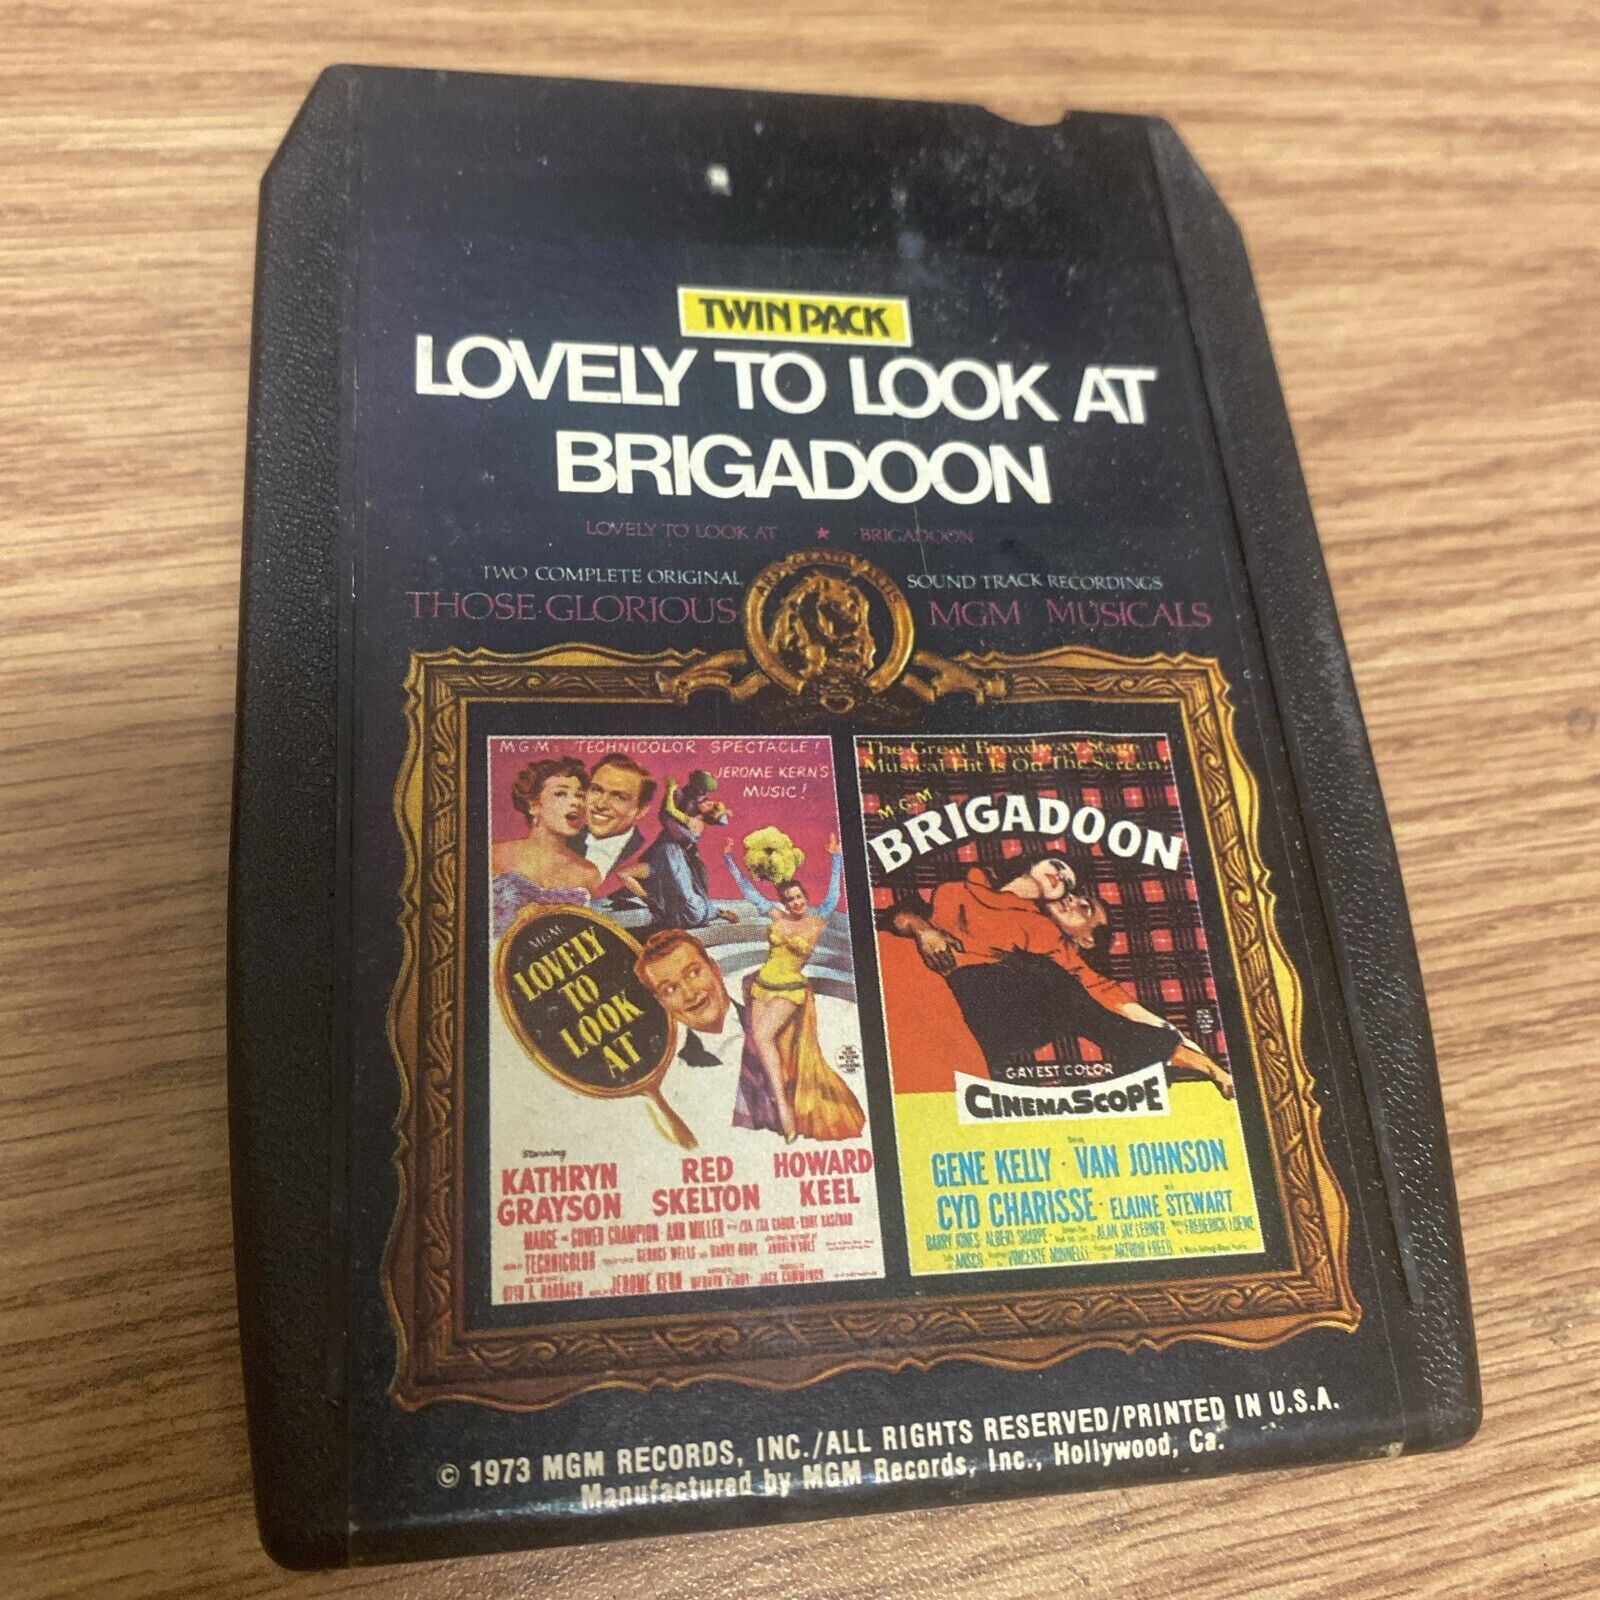 Lovely To Look At Brigadoon 8 track as is